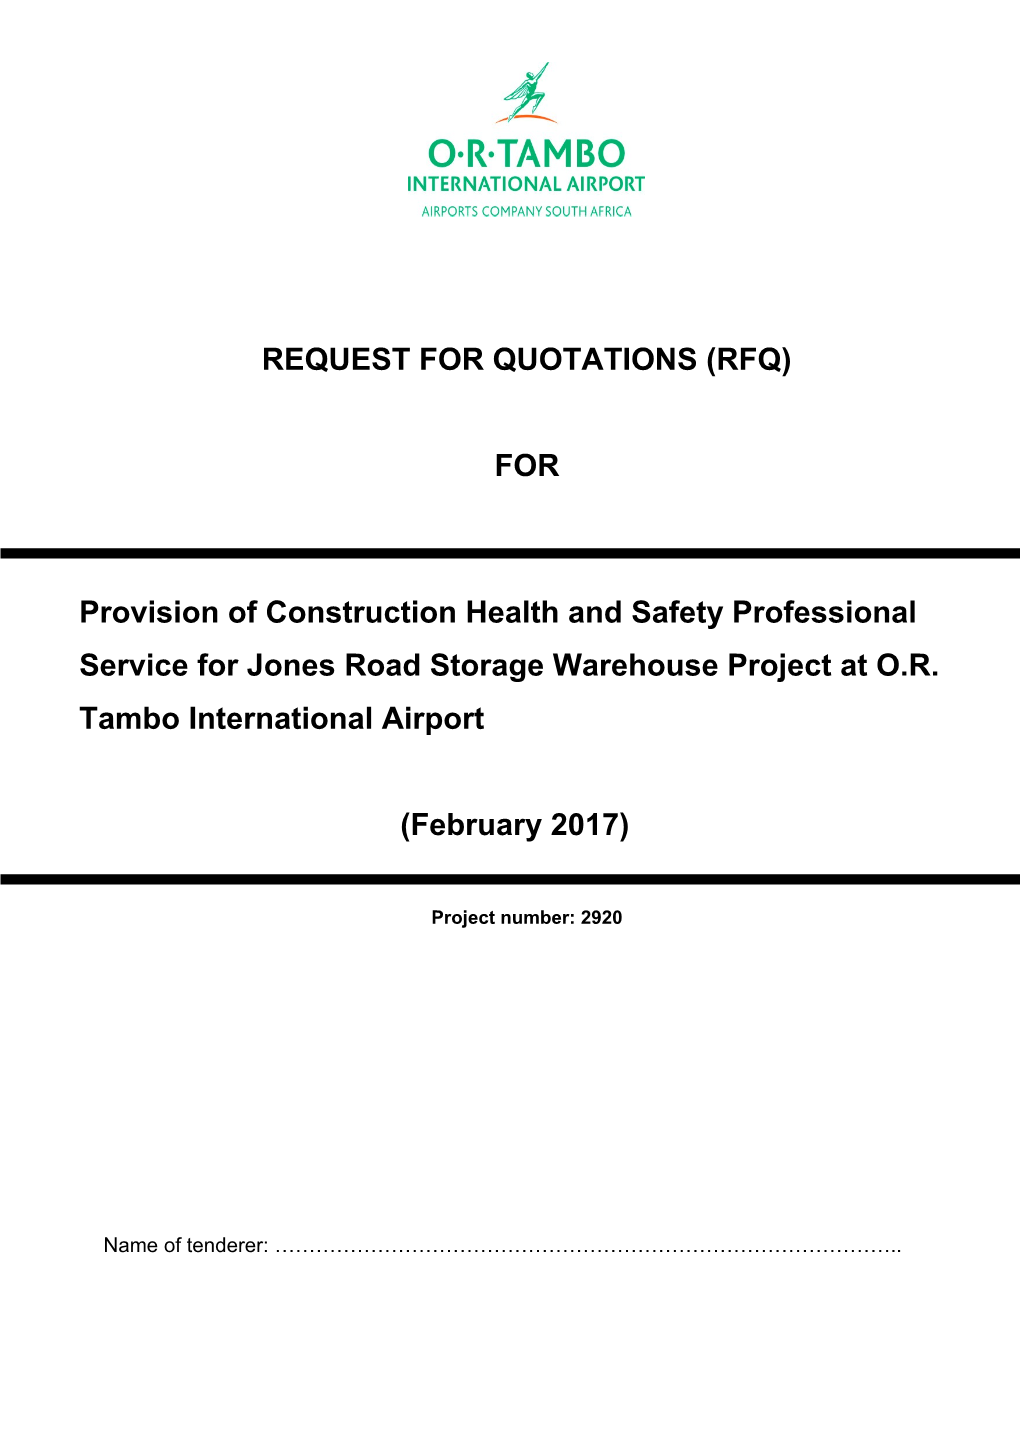 Request for Quotations (Rfq) s5